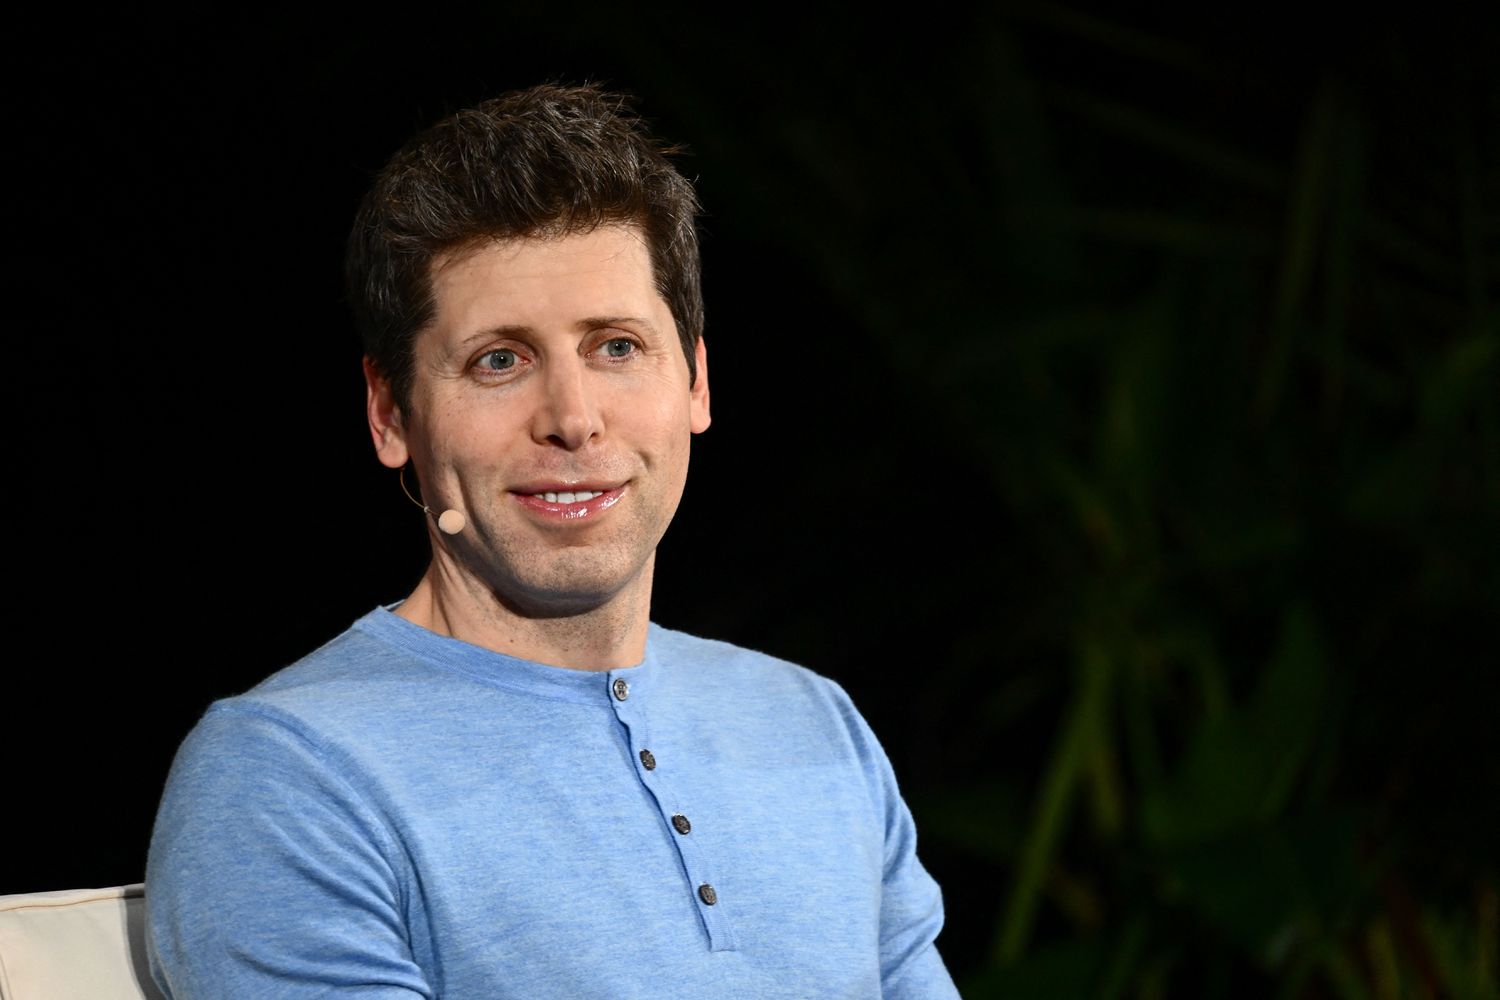 Sam Altman's iPhone stopped working after news of his dismissal from OpenAI